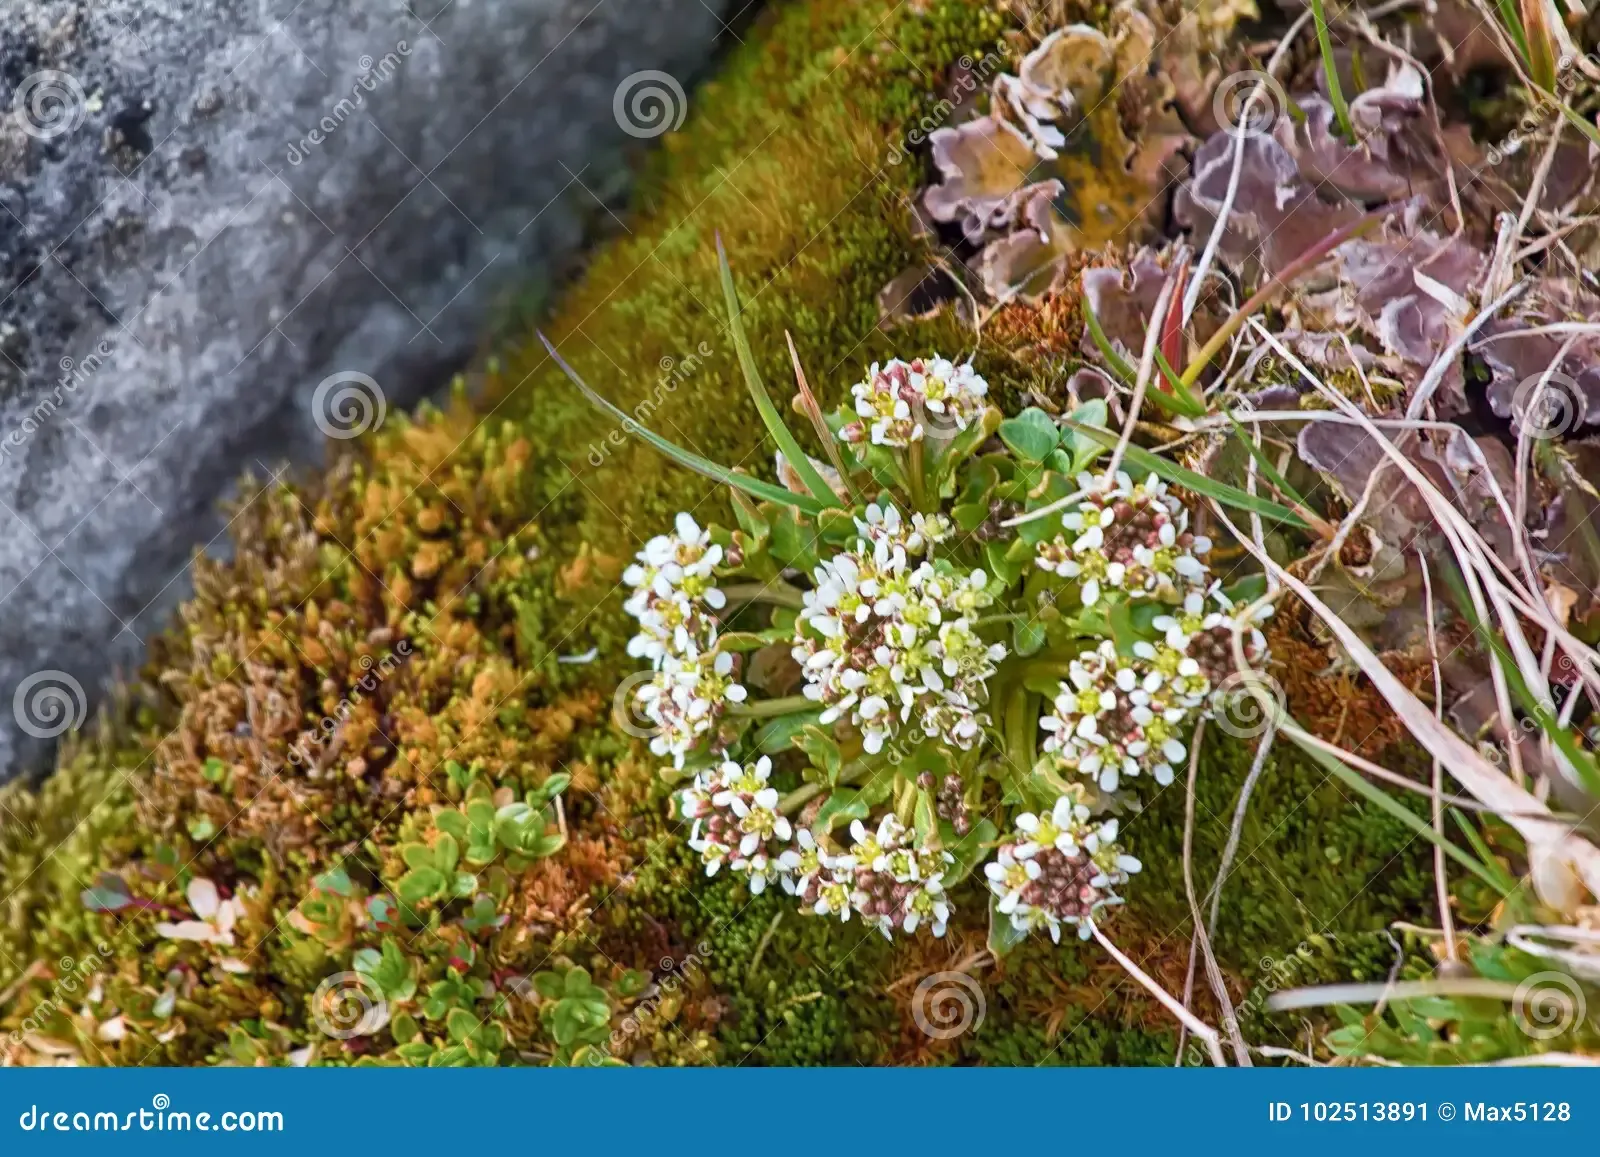 scurvy-grass-cochlearia-groenlandica-amazing-plants-scurvy-grass-cochlearia-groenlandica-biannual-sample-late-flowering-franz-102513891.jpg